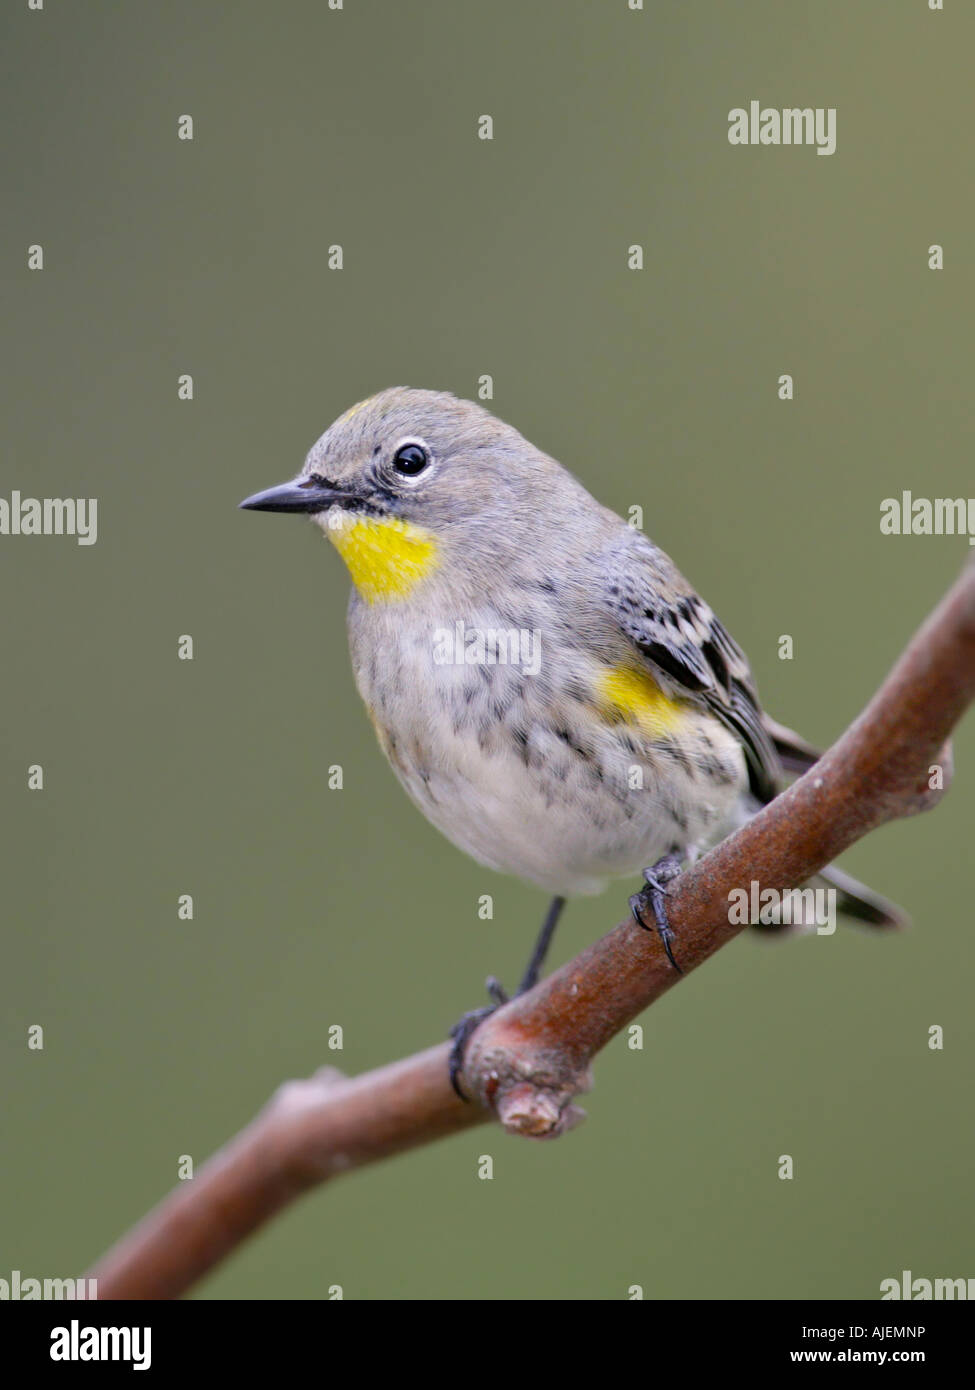 A Yellow-rumped Warbler perched on a branch Stock Photo